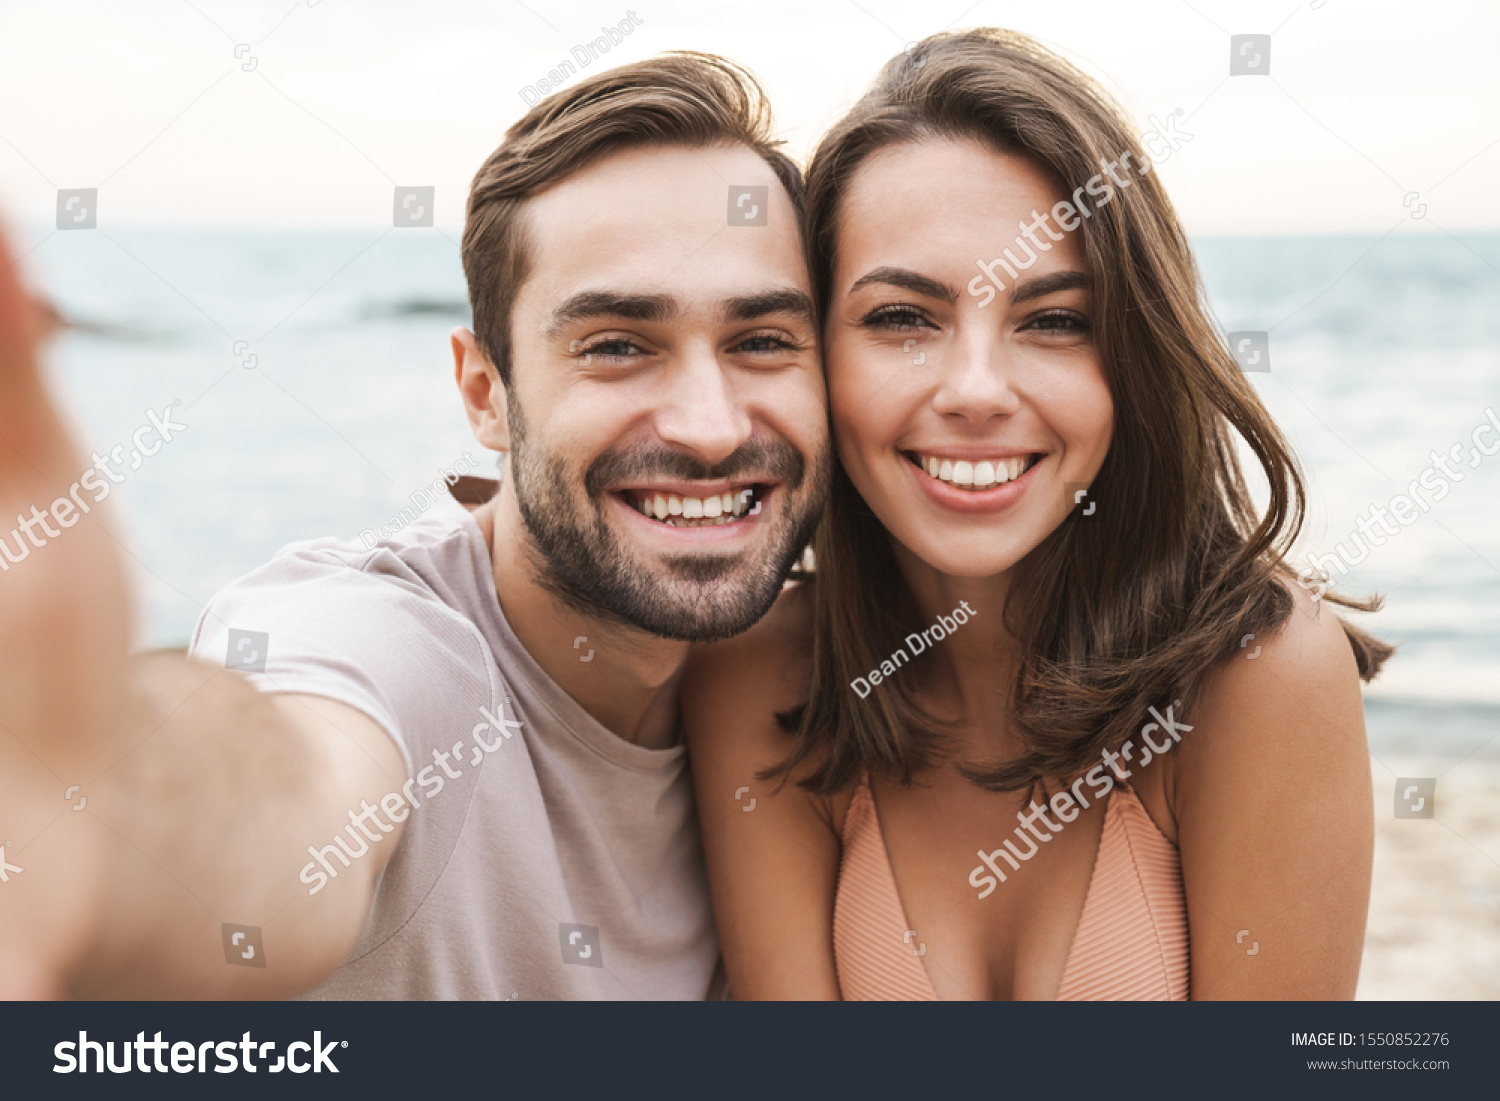 Photo of joyful young couple smiling and taking selfie photo while resting on sunny beach #1550852276